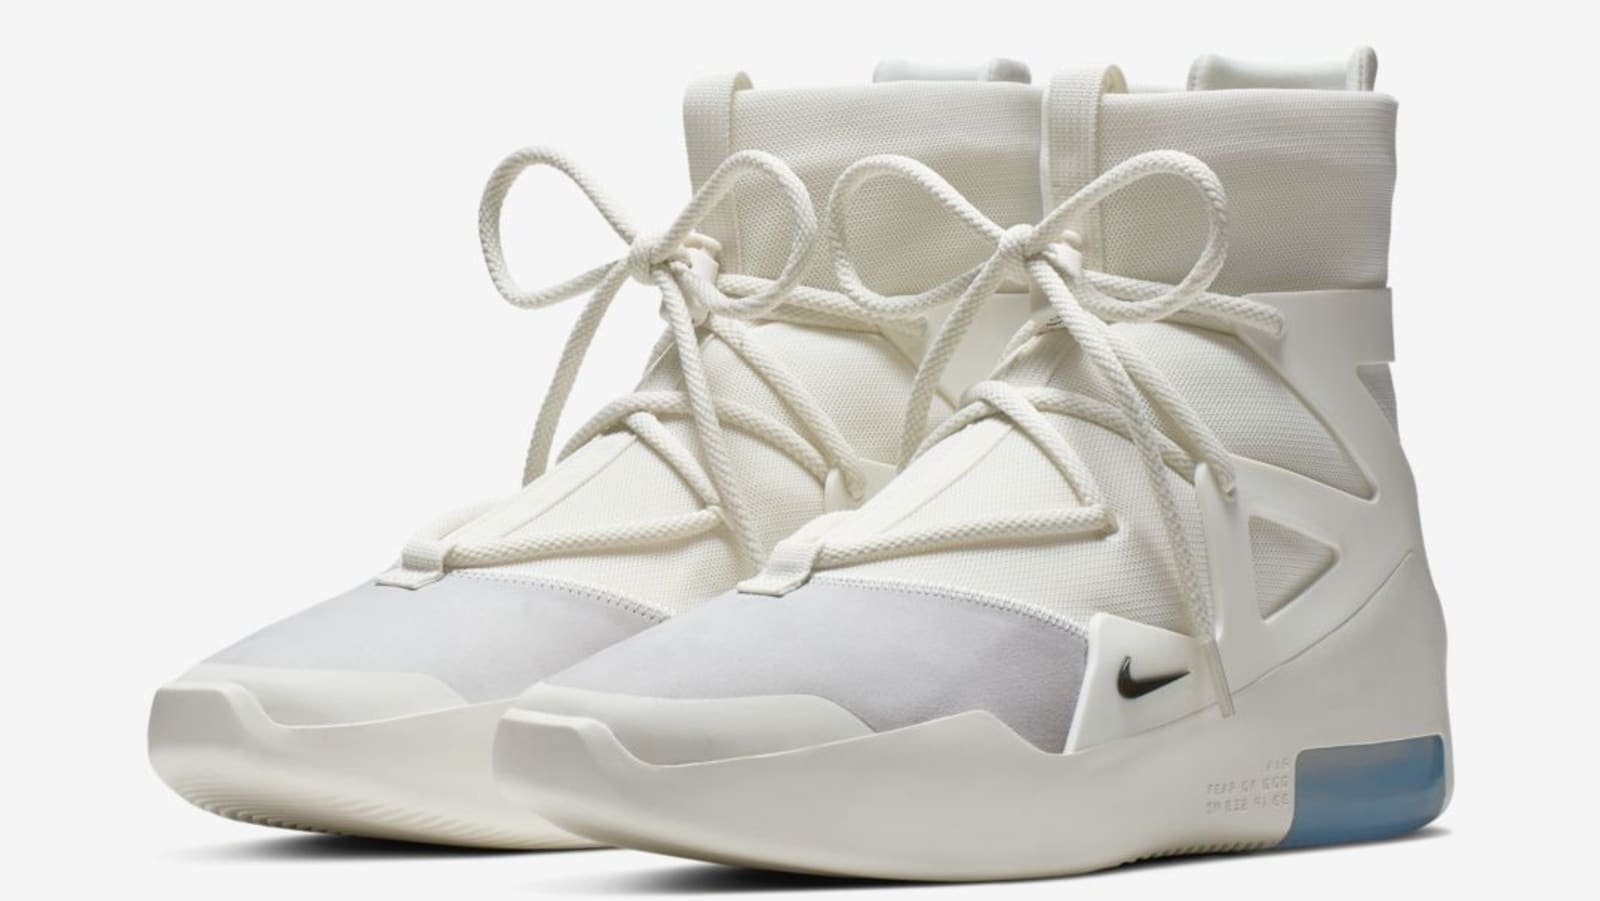 Nike Air Fear Of God 1 &quot;Sail/Black&quot; Release Date, Official Photos